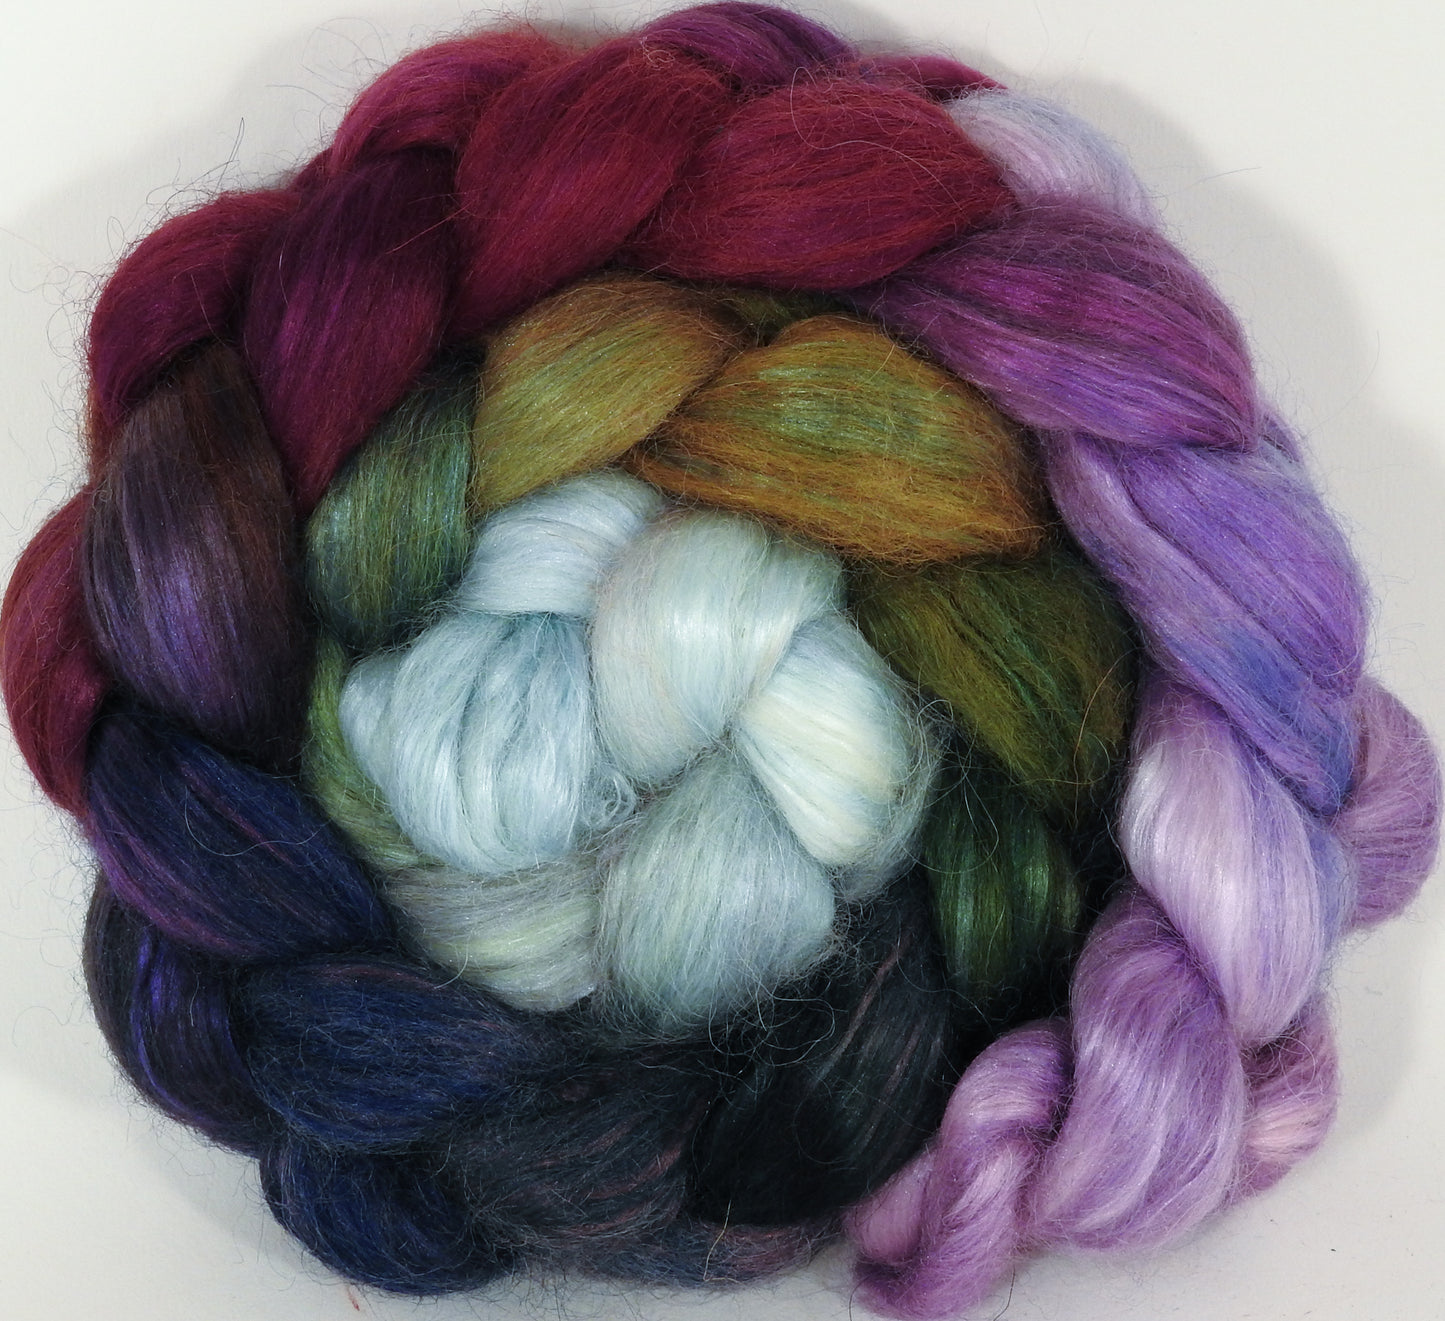 Hand-dyed wensleydale/ mulberry silk roving ( 65/35) - Cabbages & Kings -  (6.3 oz.) - Inglenook Fibers